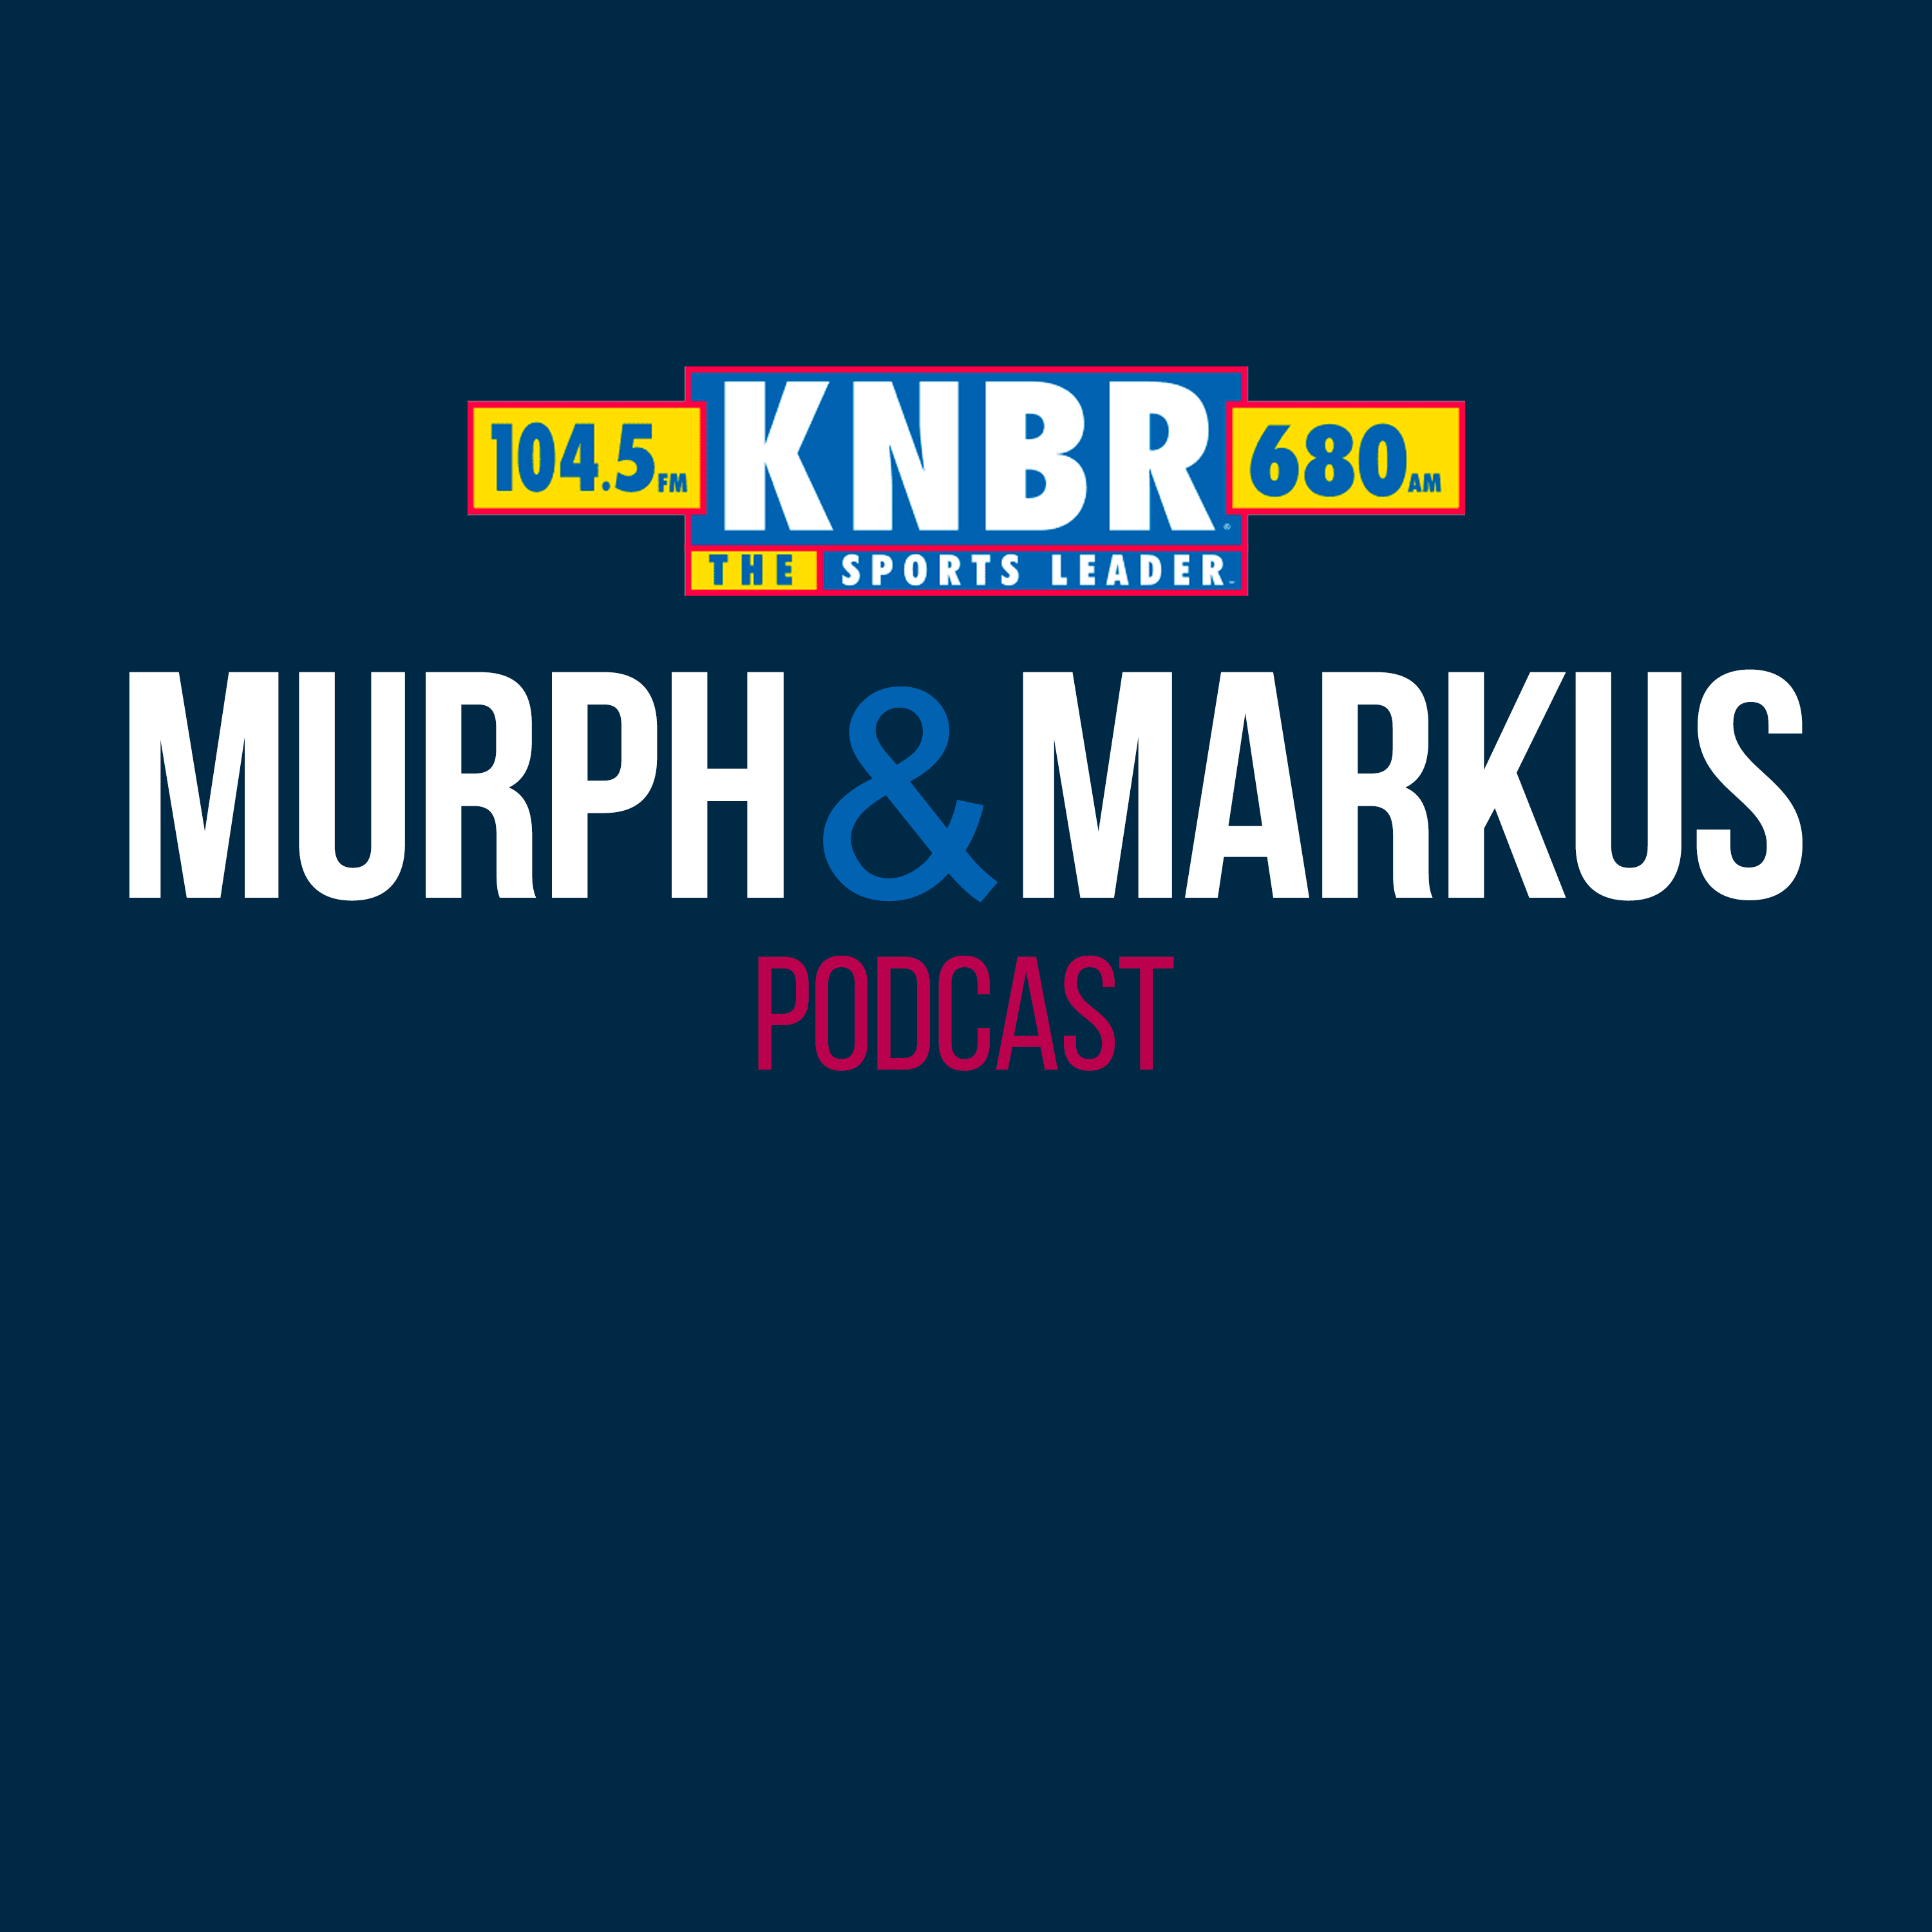 5-3 Big Hit: What baseball home run caught you in the feels like the Yaz home run at Fenway did yesterday? Murph and Markus discuss